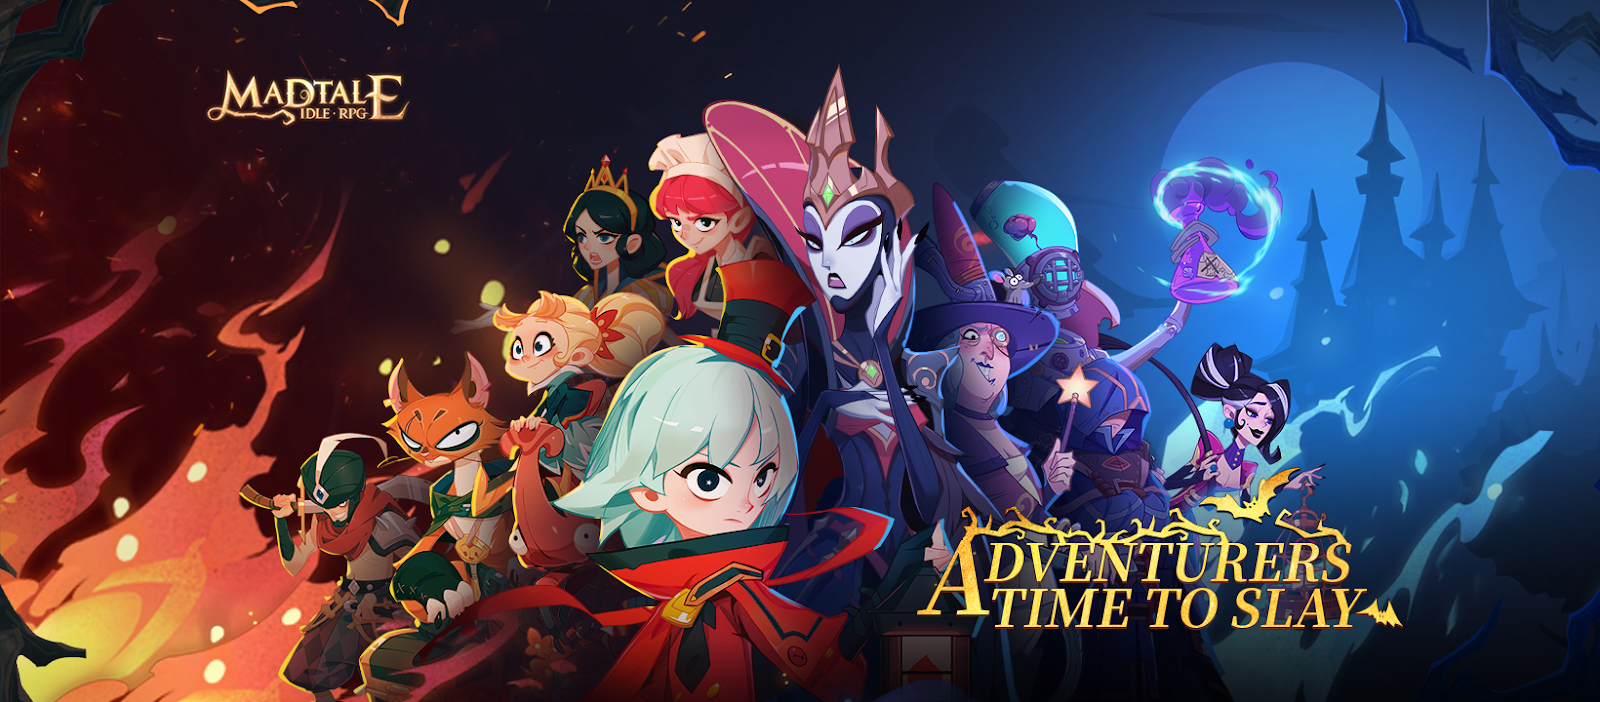 Tale of Sword, a brand new anime-themed idle RPG, launches in open beta for  Android | Pocket Gamer